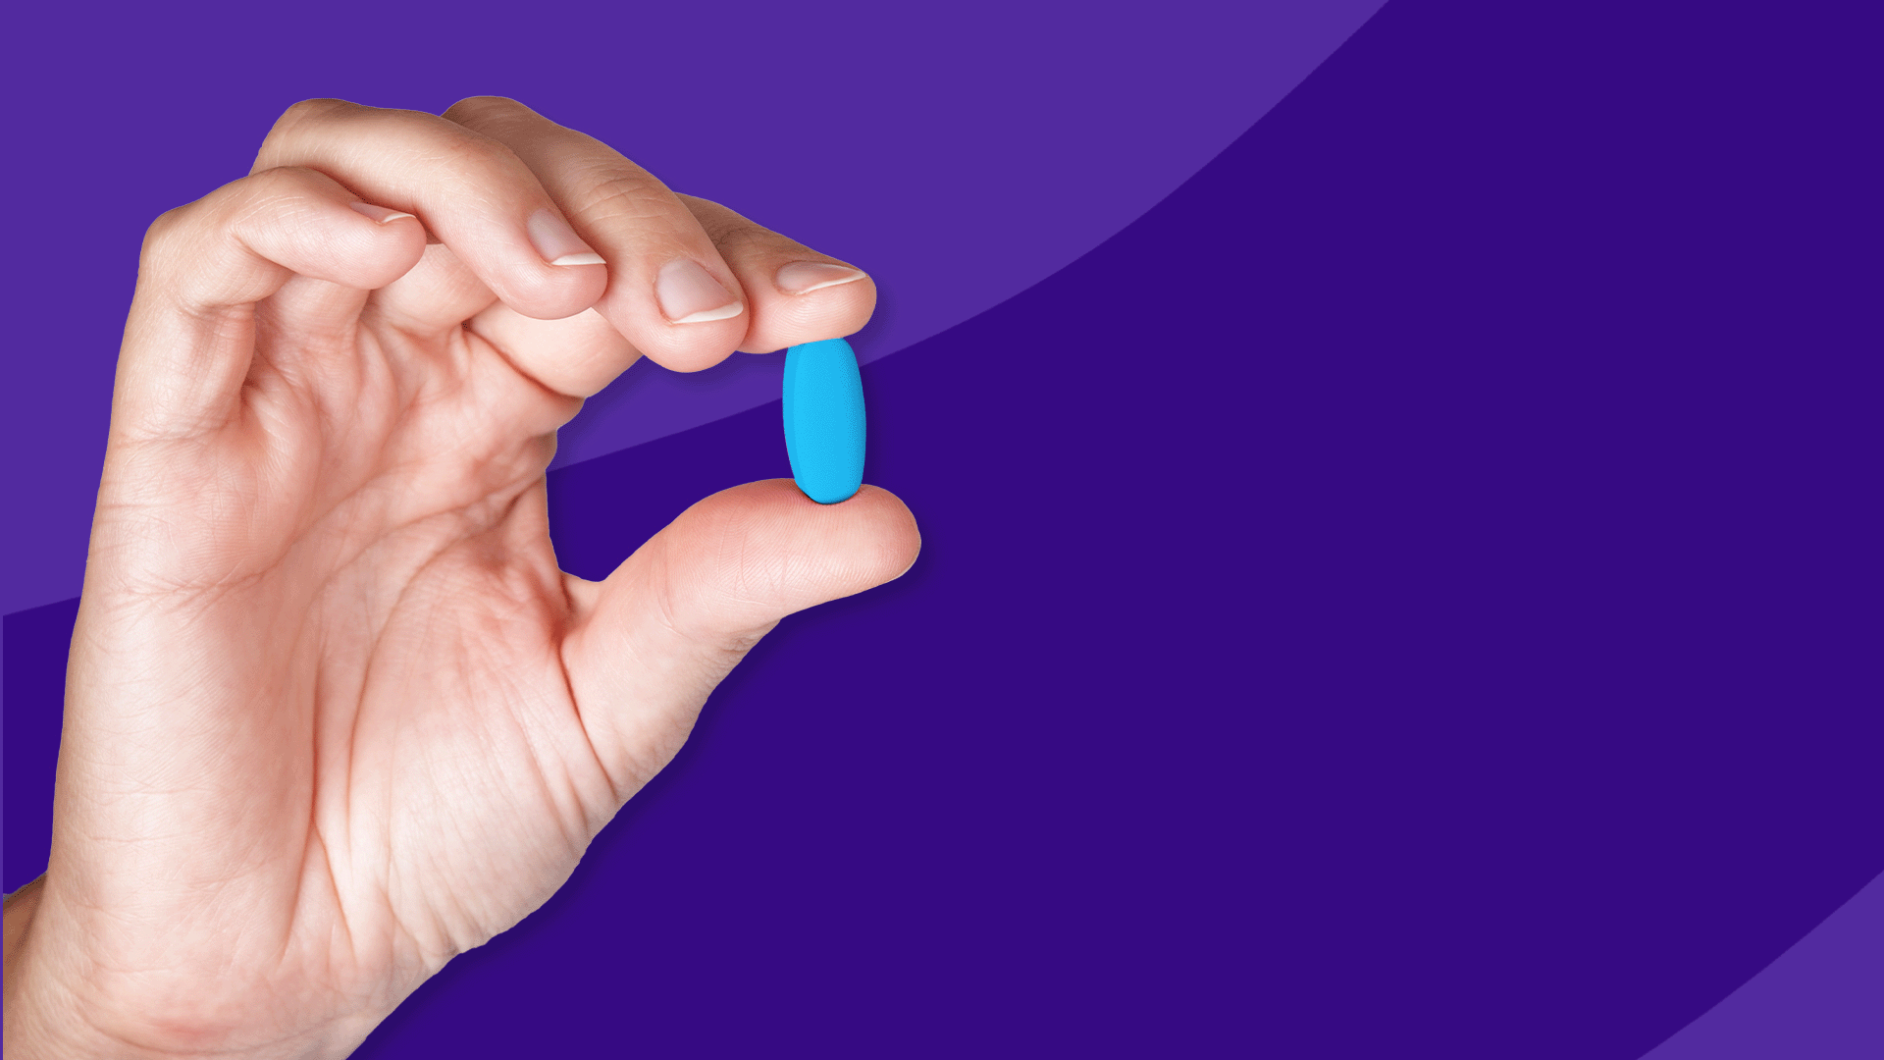 Hand holding Rx pill: What is losartan used for?